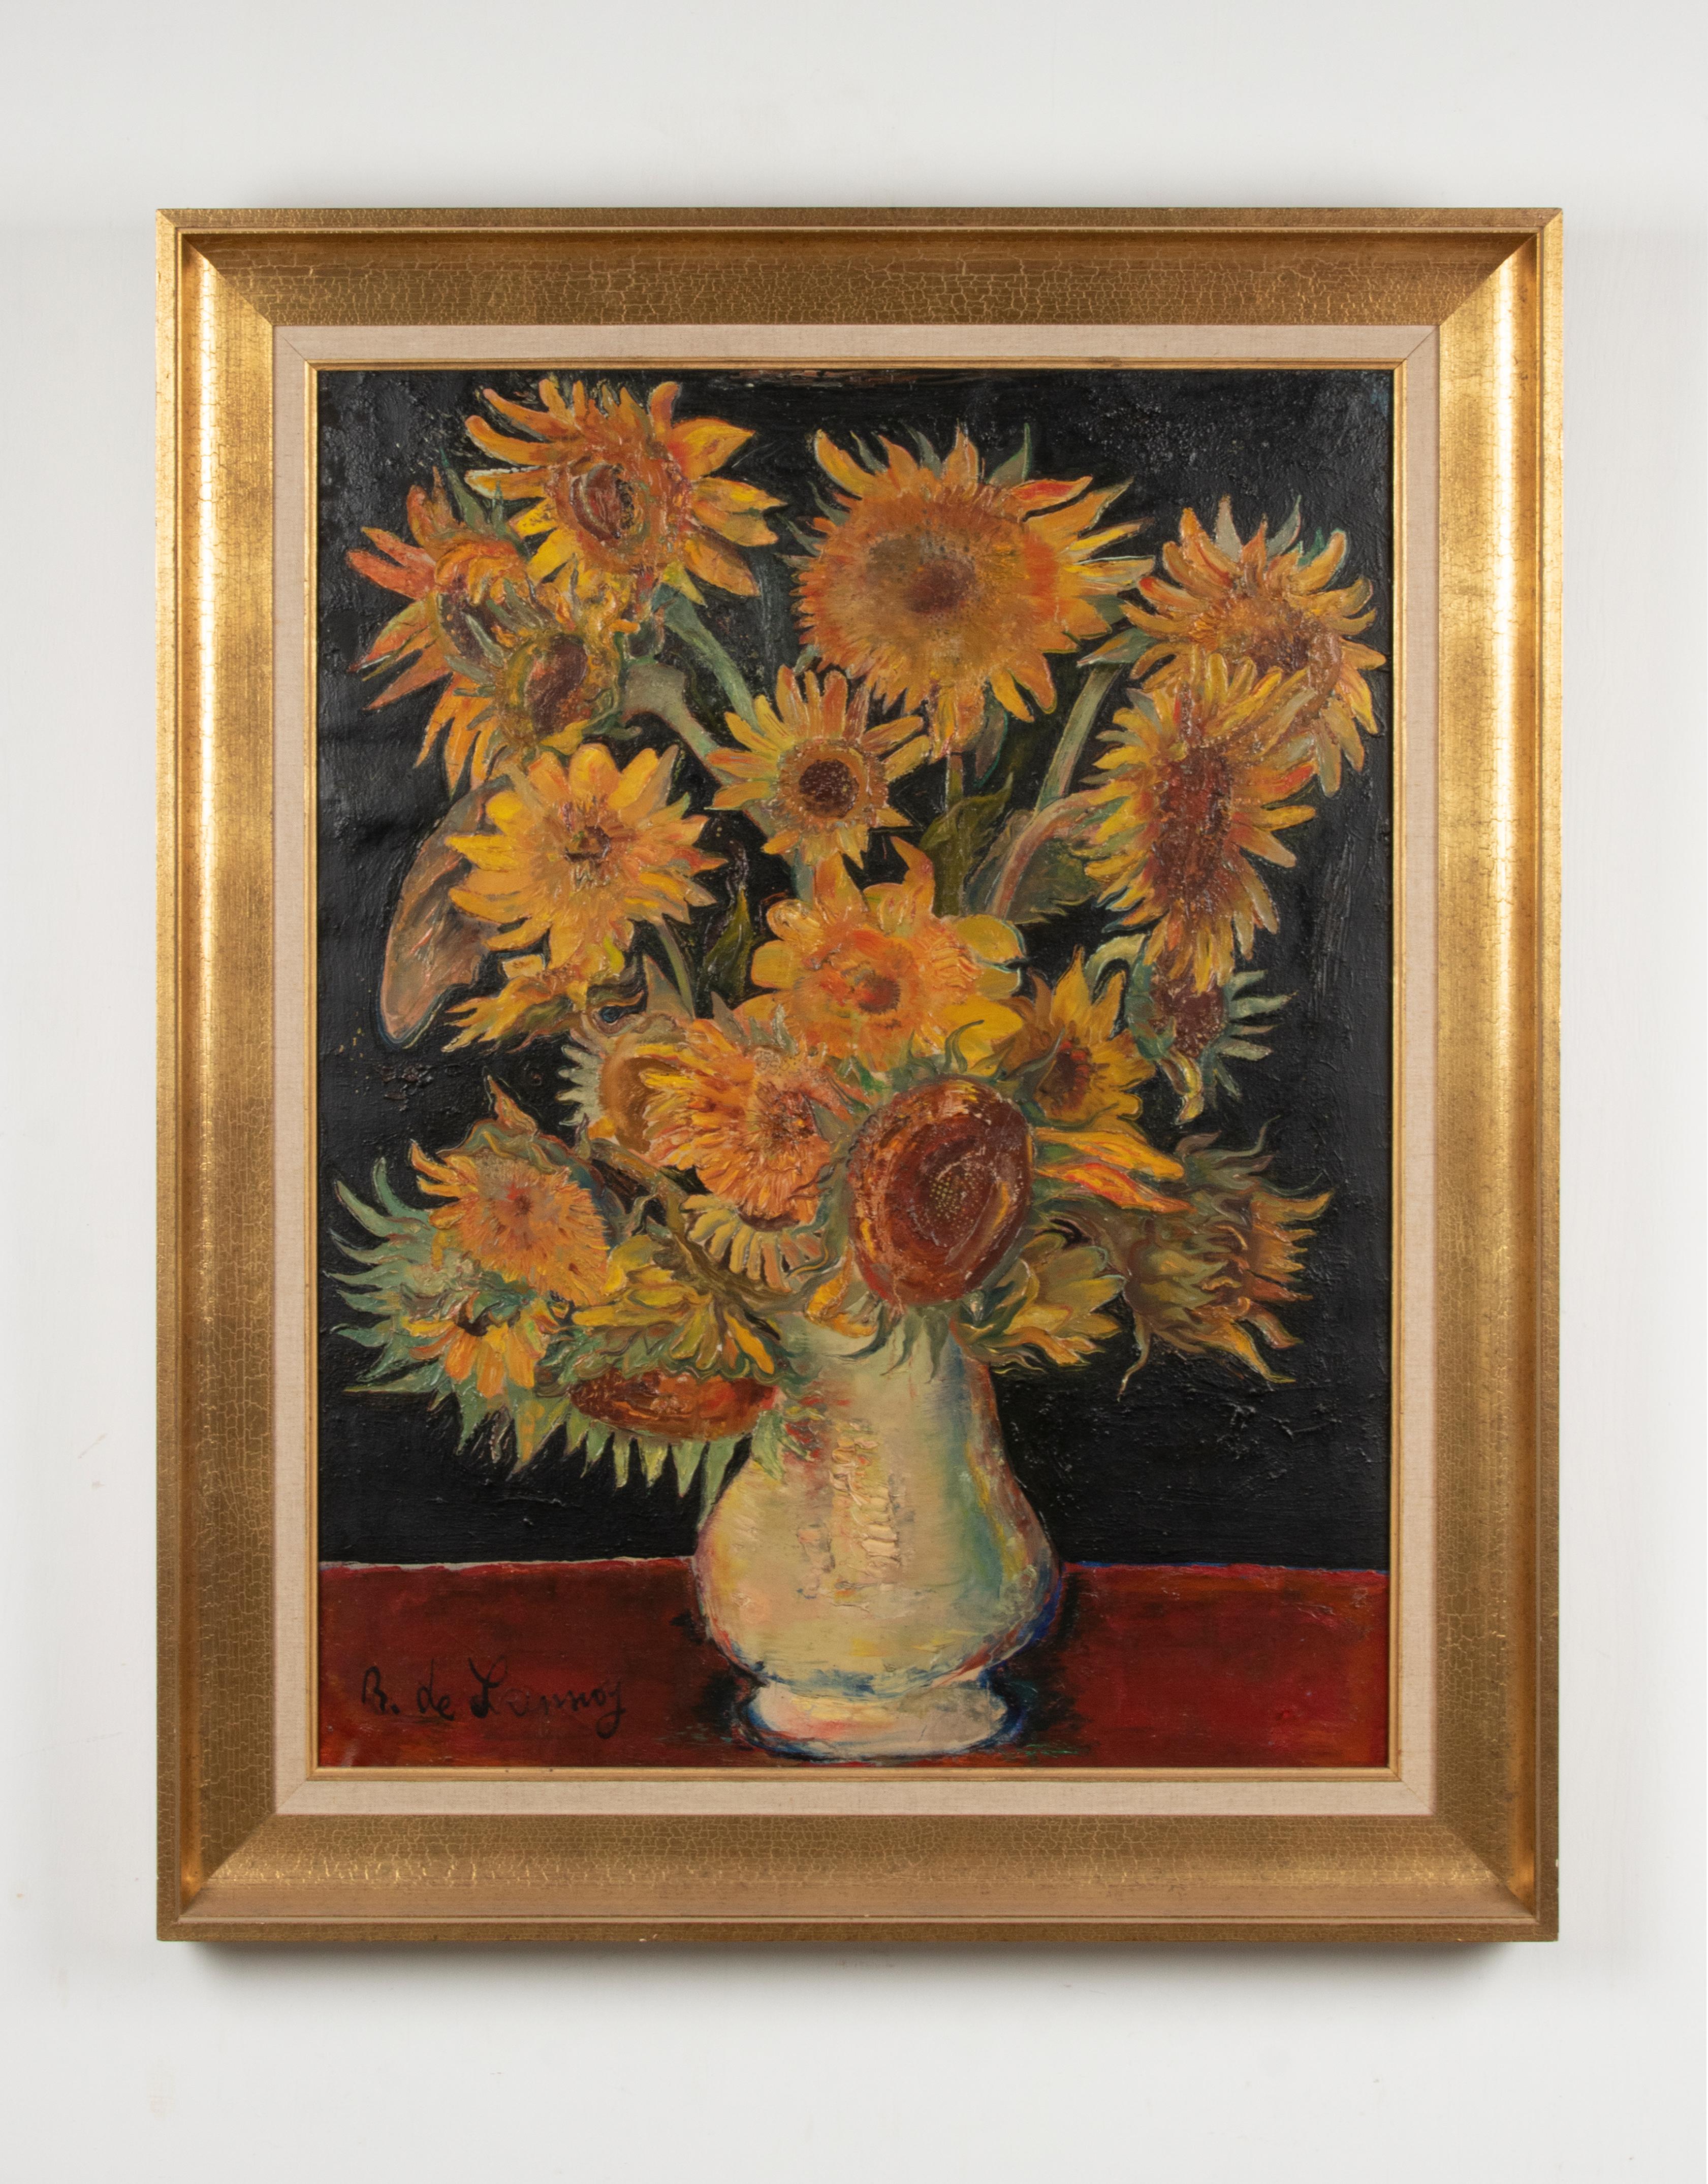 Large and expressive painting with a flower still life of sunflowers in a vase. Beautiful in impressionistic touch and thickly painted. A clear reference to the of Vincent van Gogh, who is famous for his sunflowers.
The painting dates from circa